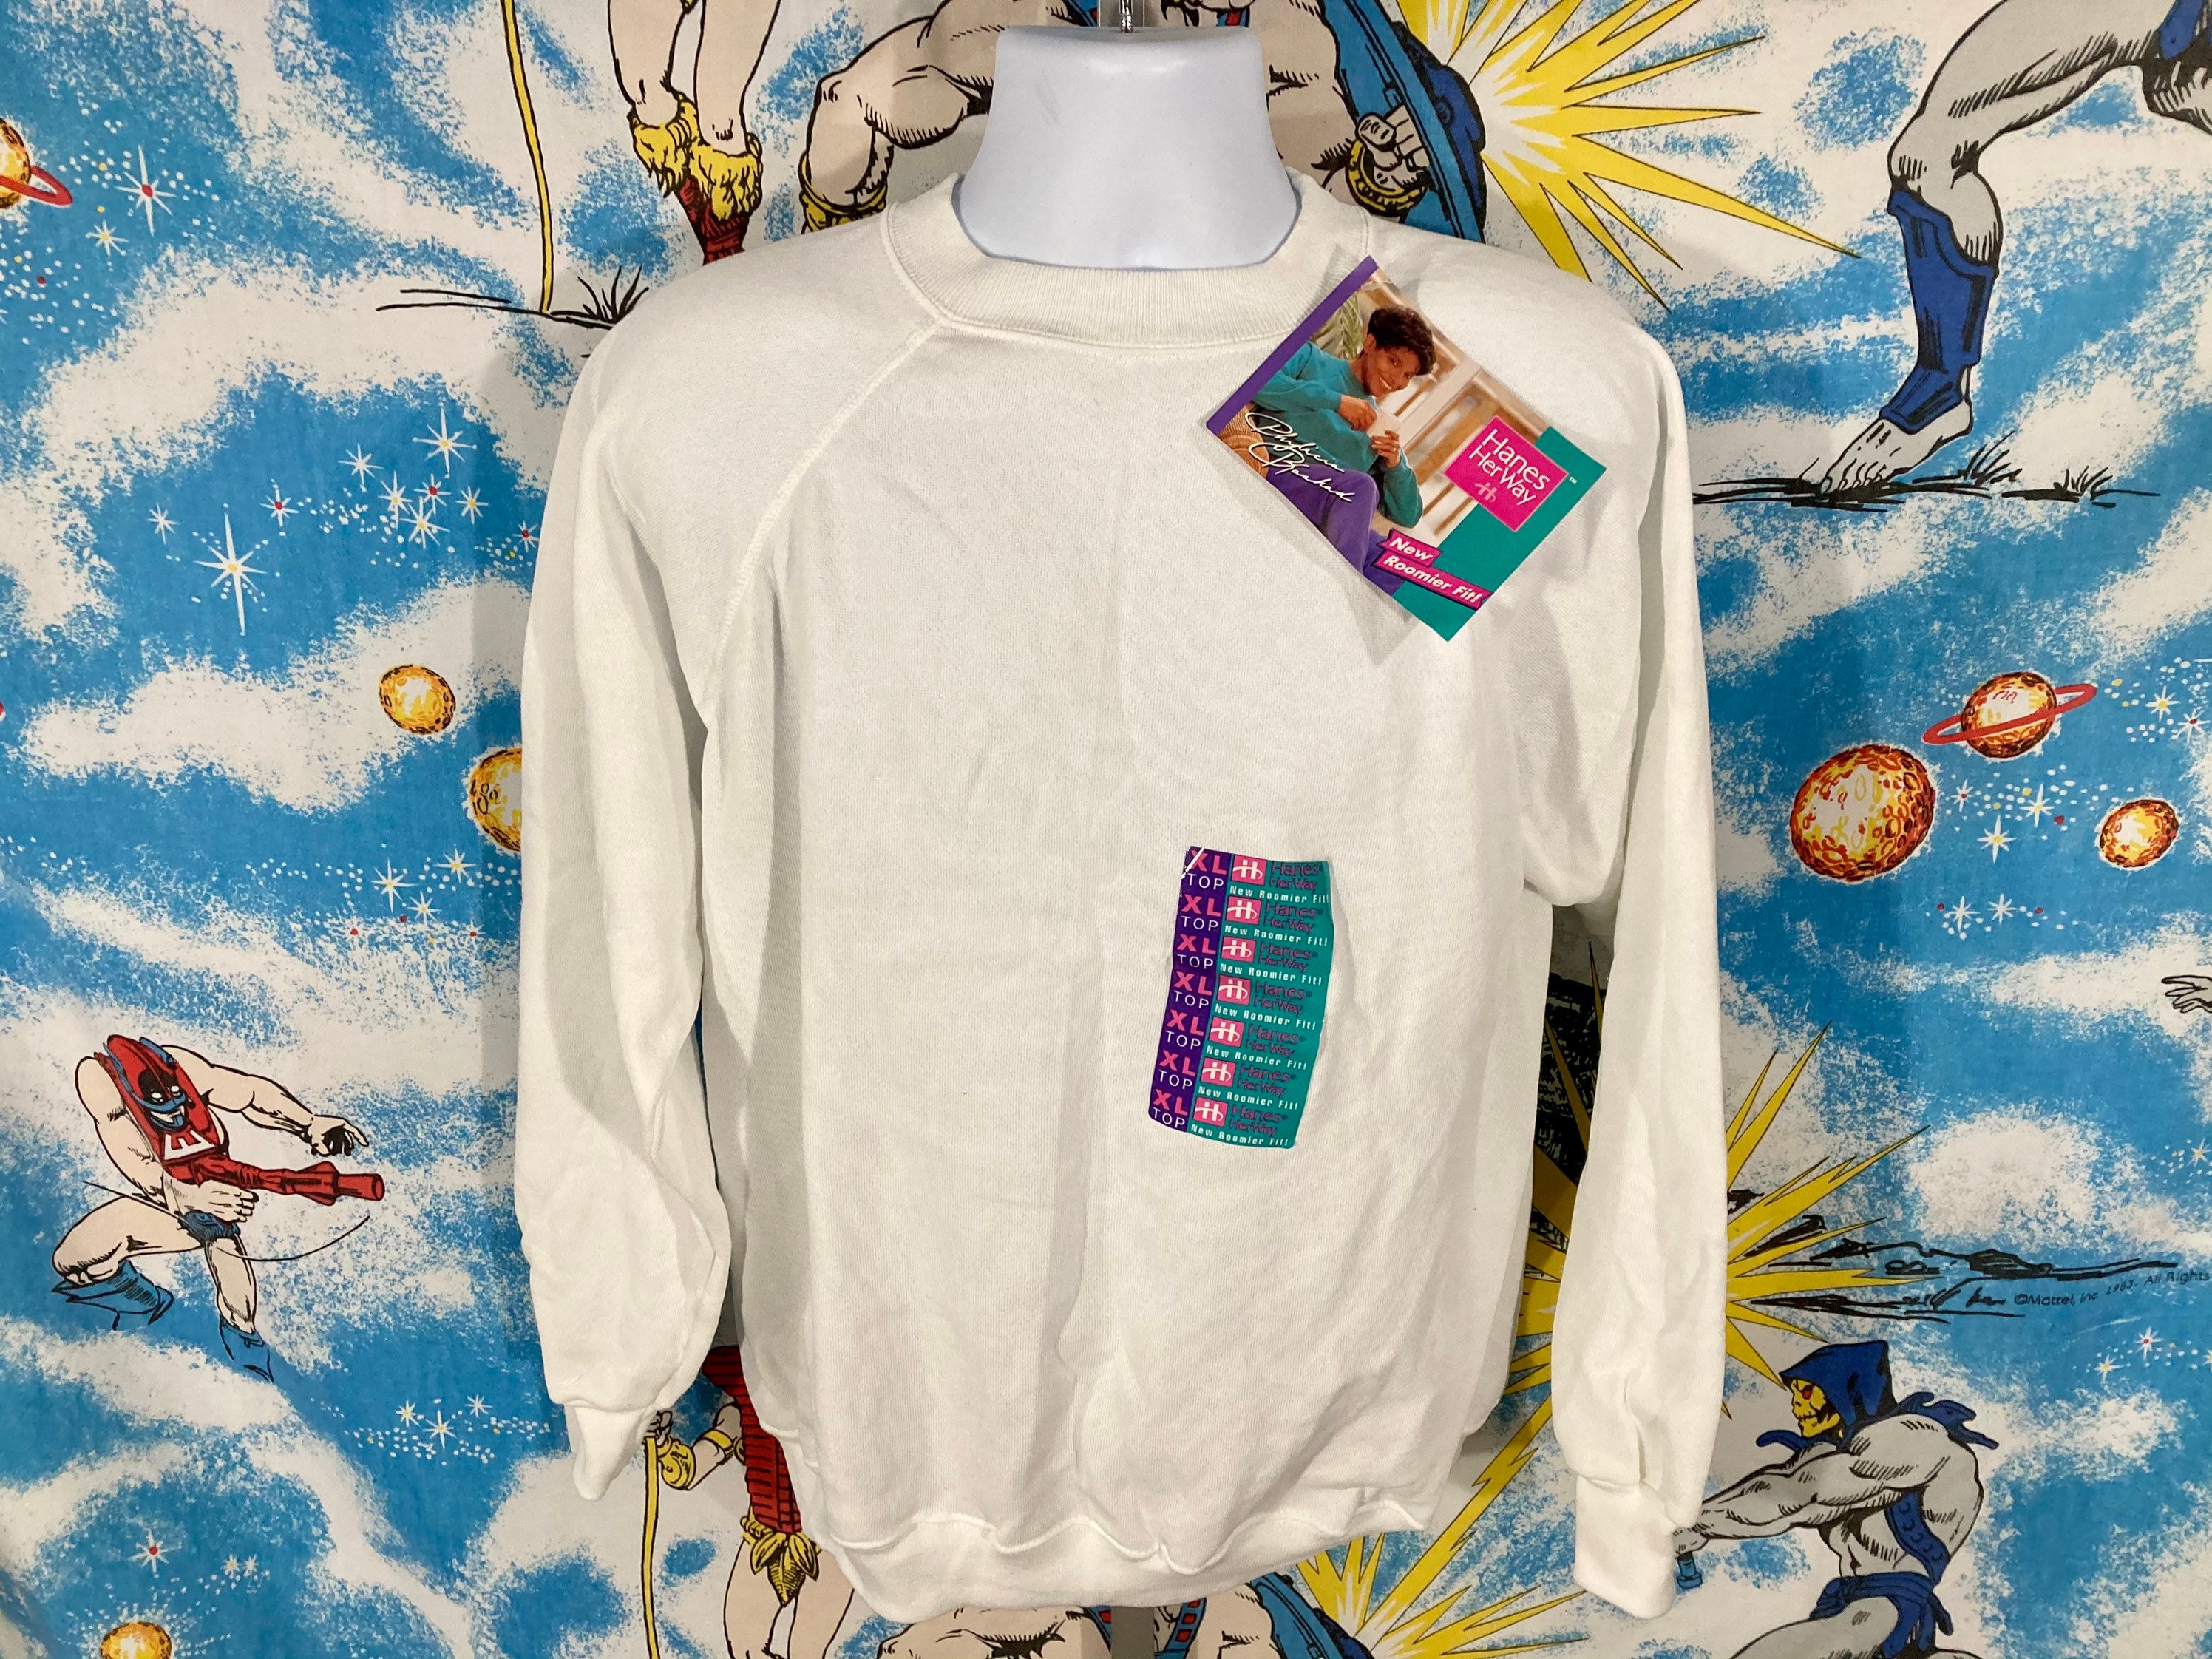 Vintage 1992 Deadstock NWT Hanes Her Way W Phylicia Rashad Tag Sz XL 90s  Super Soft White Blank Crewneck Pullover Shirt Cosby Show -  Canada